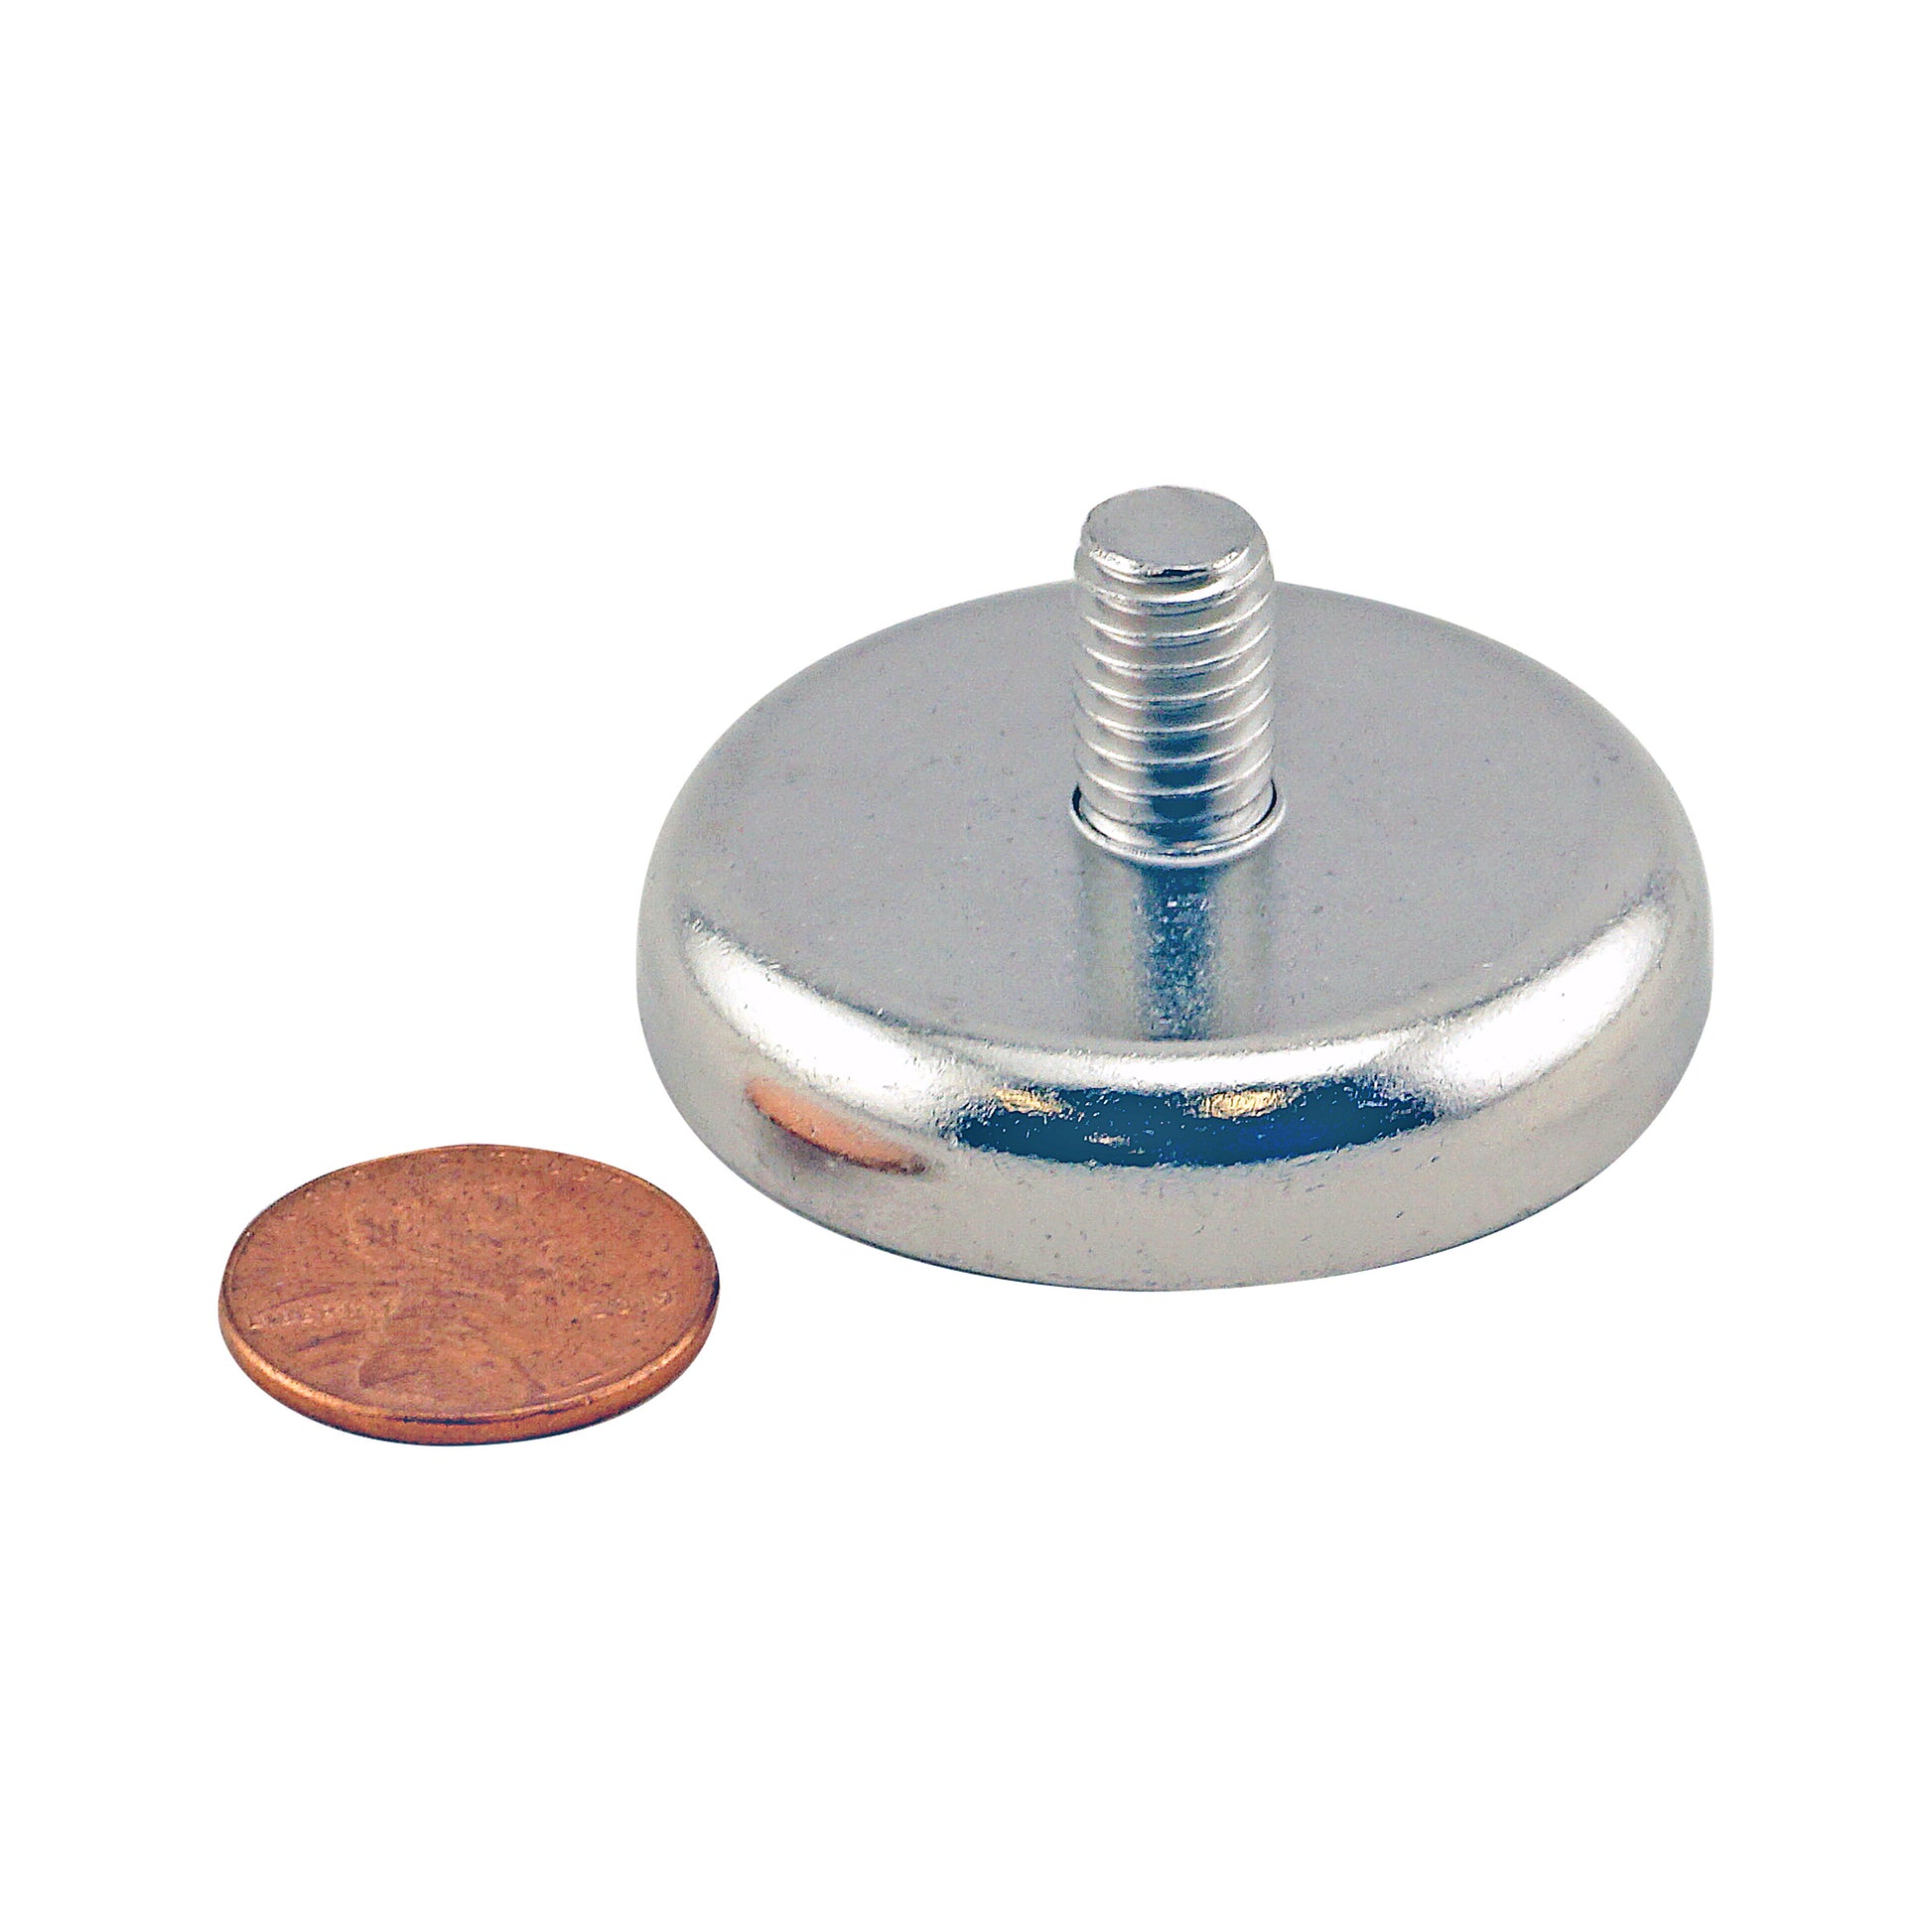 Load image into Gallery viewer, CACM165 Ceramic Round Base Magnet with Male Thread - Compared to Penny for Size Reference